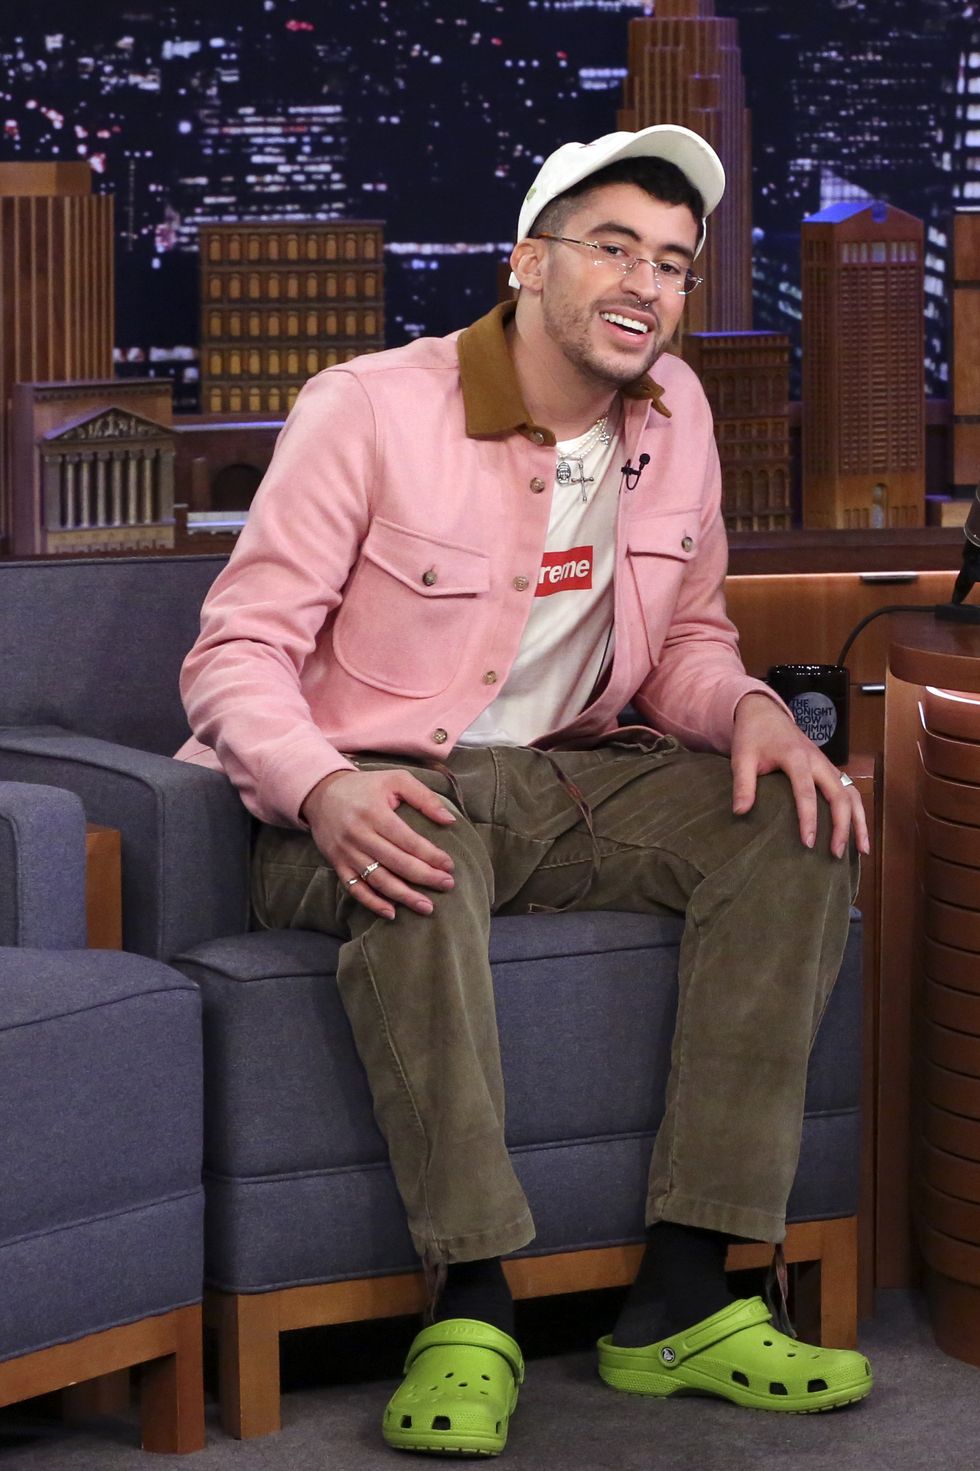 Bad Bunny on The Tonight Show in Pink in February